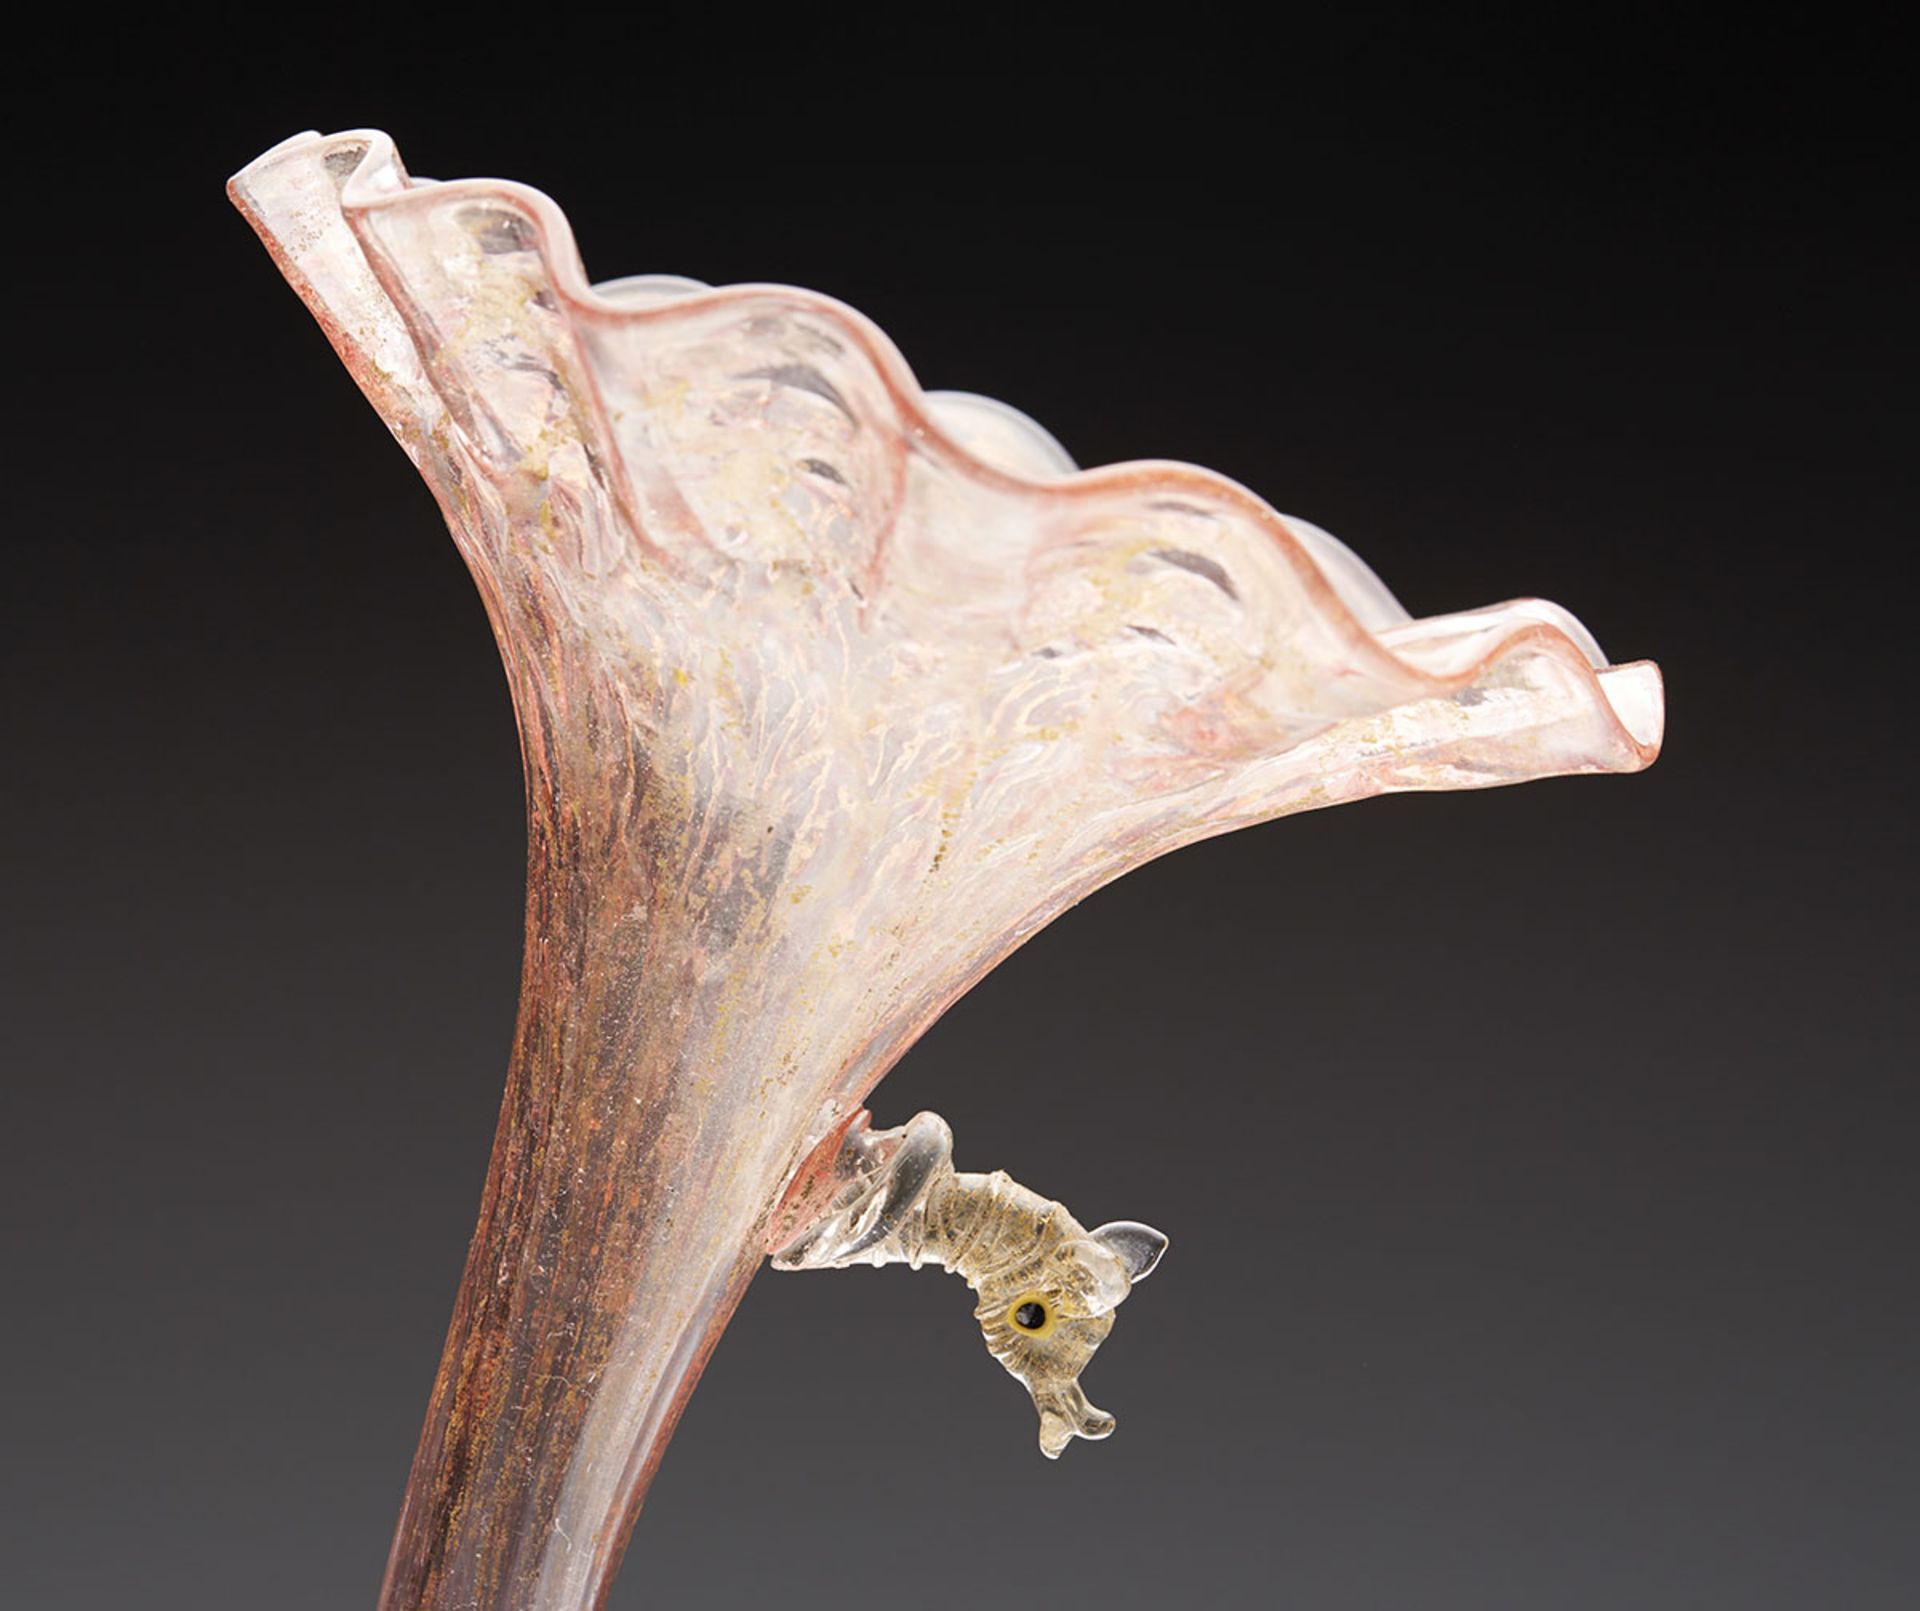 Antique Venetian Trumpet Glass Vase With Horse Heads Early 20Th C. - Image 4 of 10